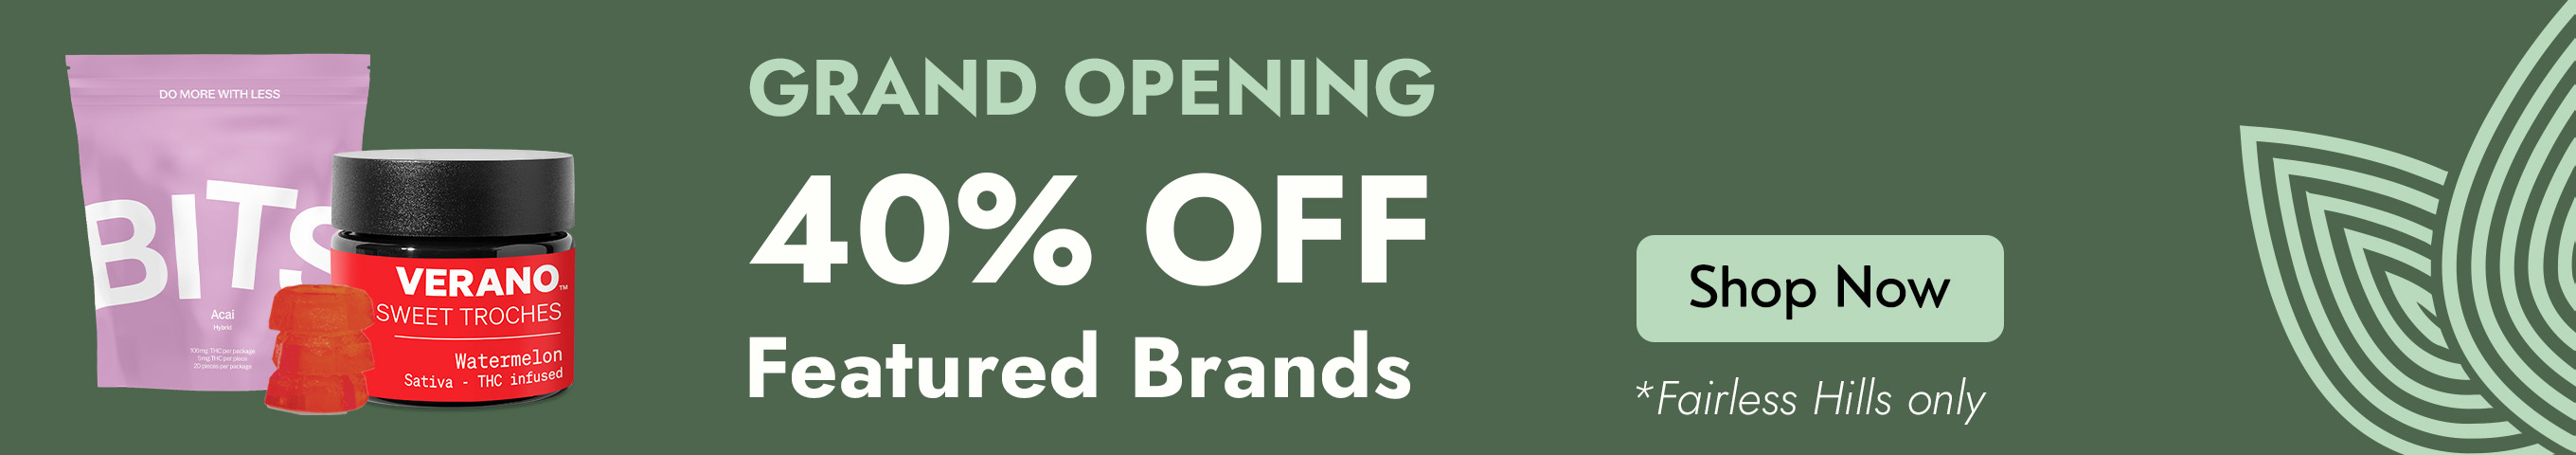 Cannabis Promo, Cannabis Sales, Cannabis Discounts, Cannabis on Sale, Grand Opening Day: 40% Off Featured Brands - Fairless Hills 